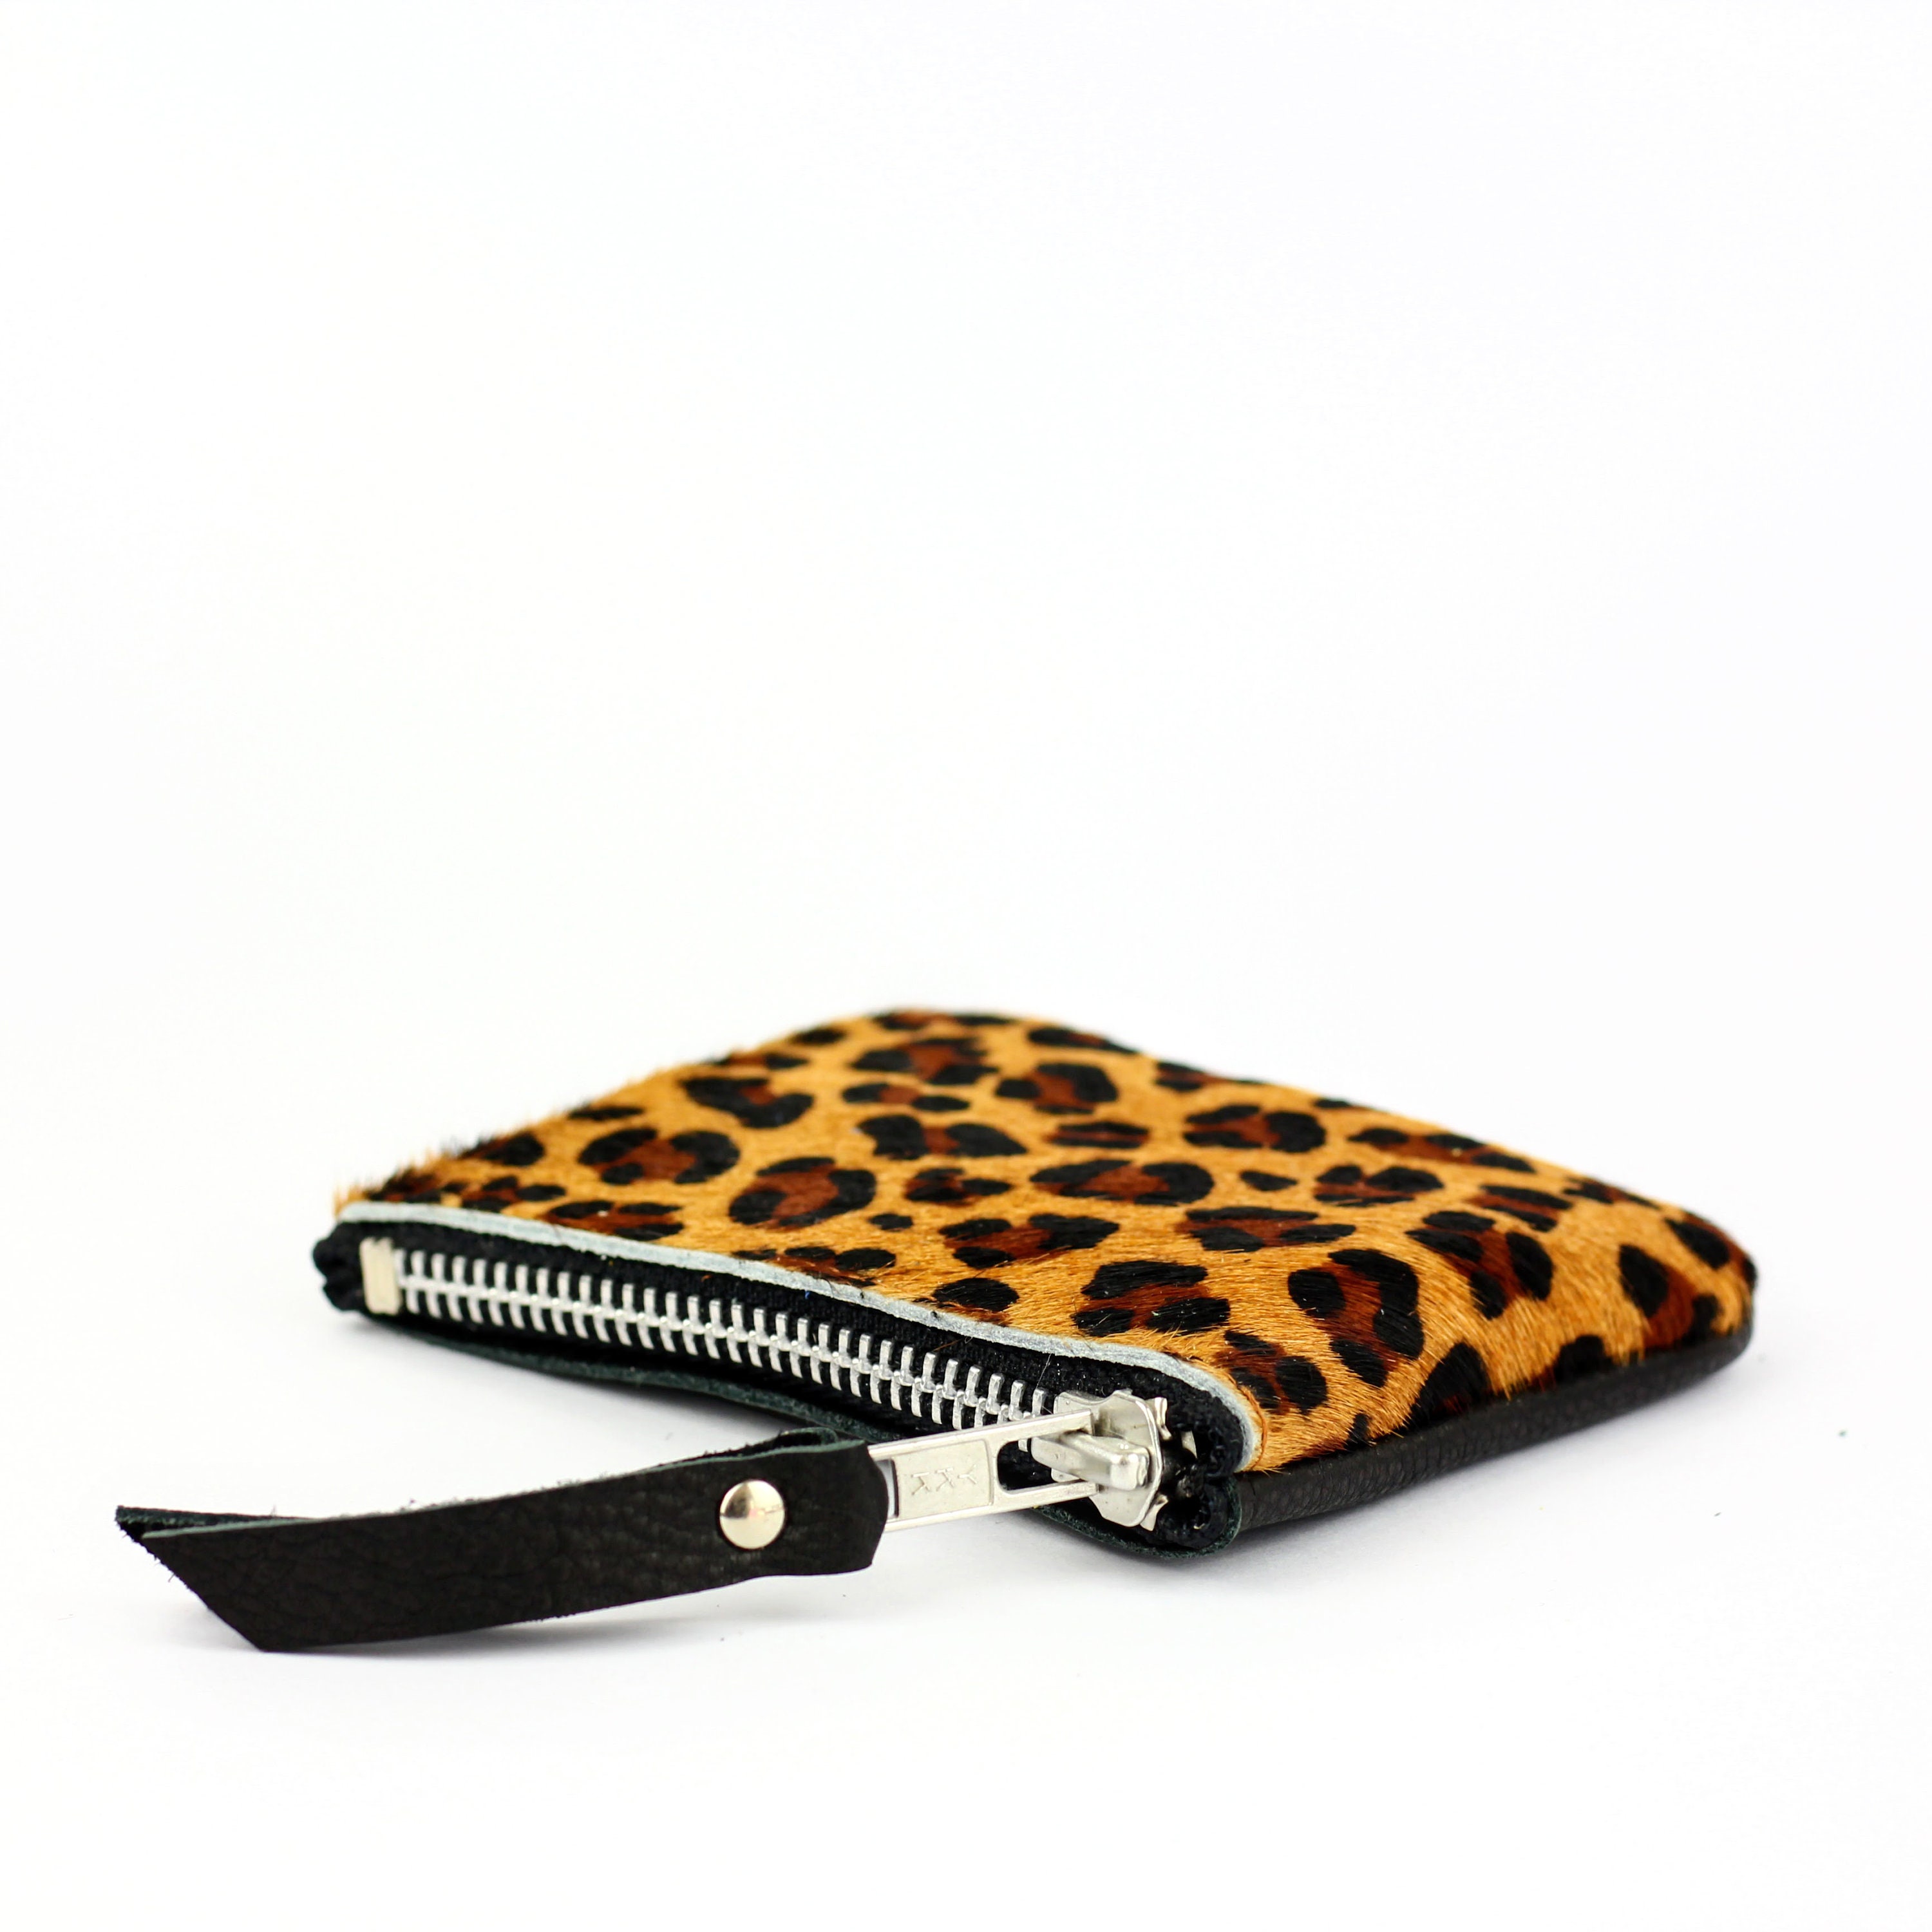 Clare V. Leather Animal Print Pouch - Green Wallets, Accessories